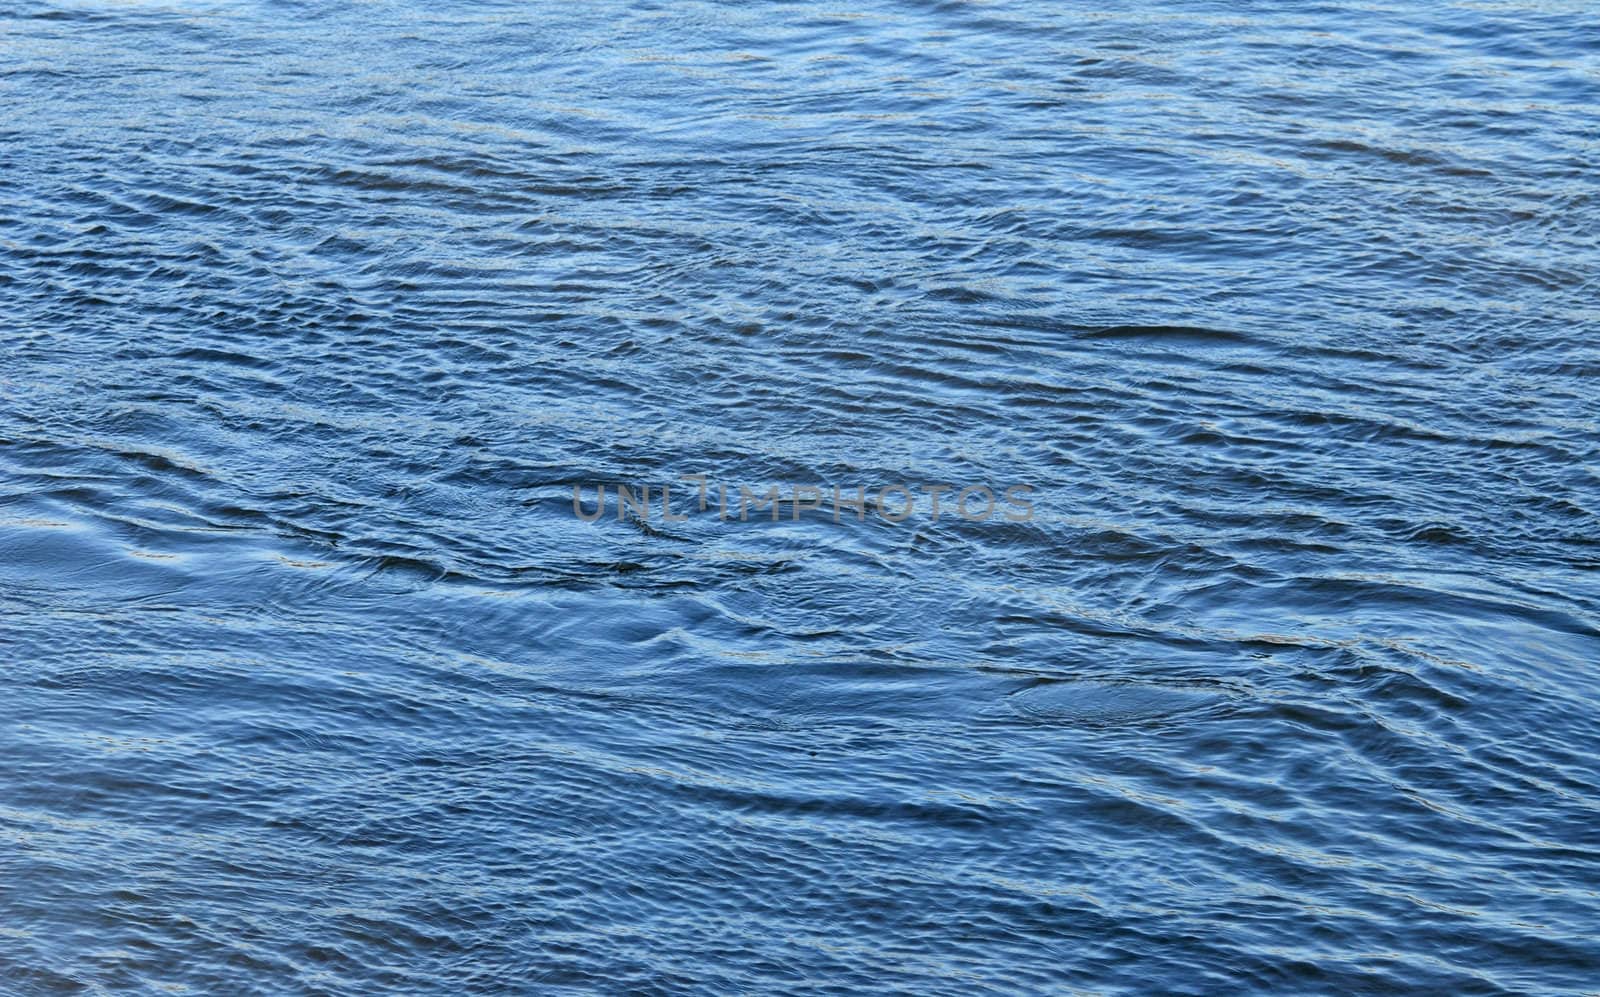 Water surface rippled by the wind.